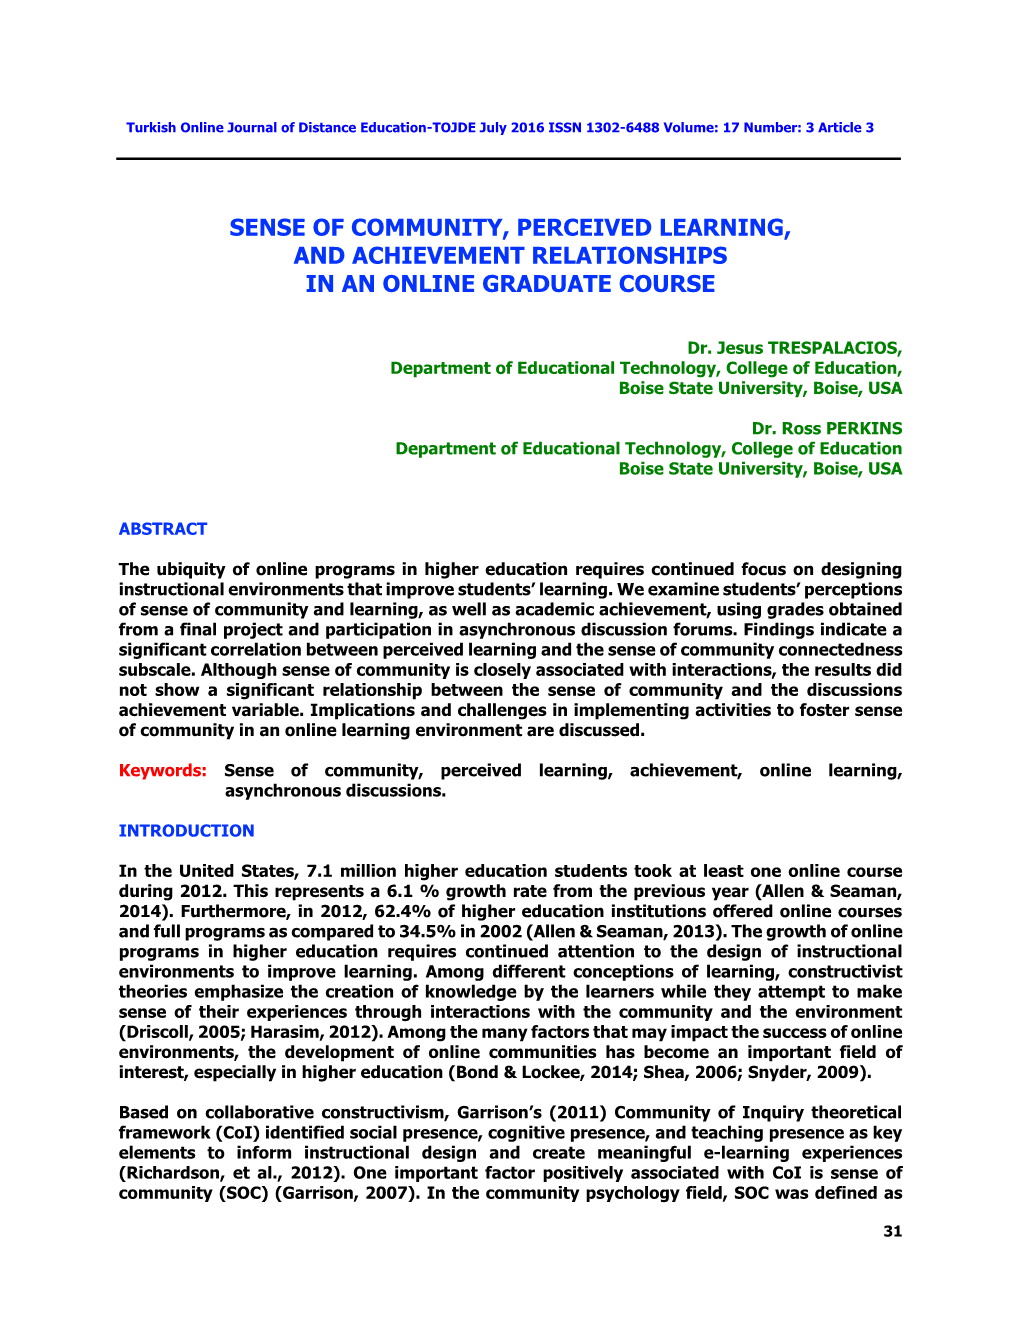 Sense of Community, Perceived Learning, and Achievement Relationships in an Online Graduate Course